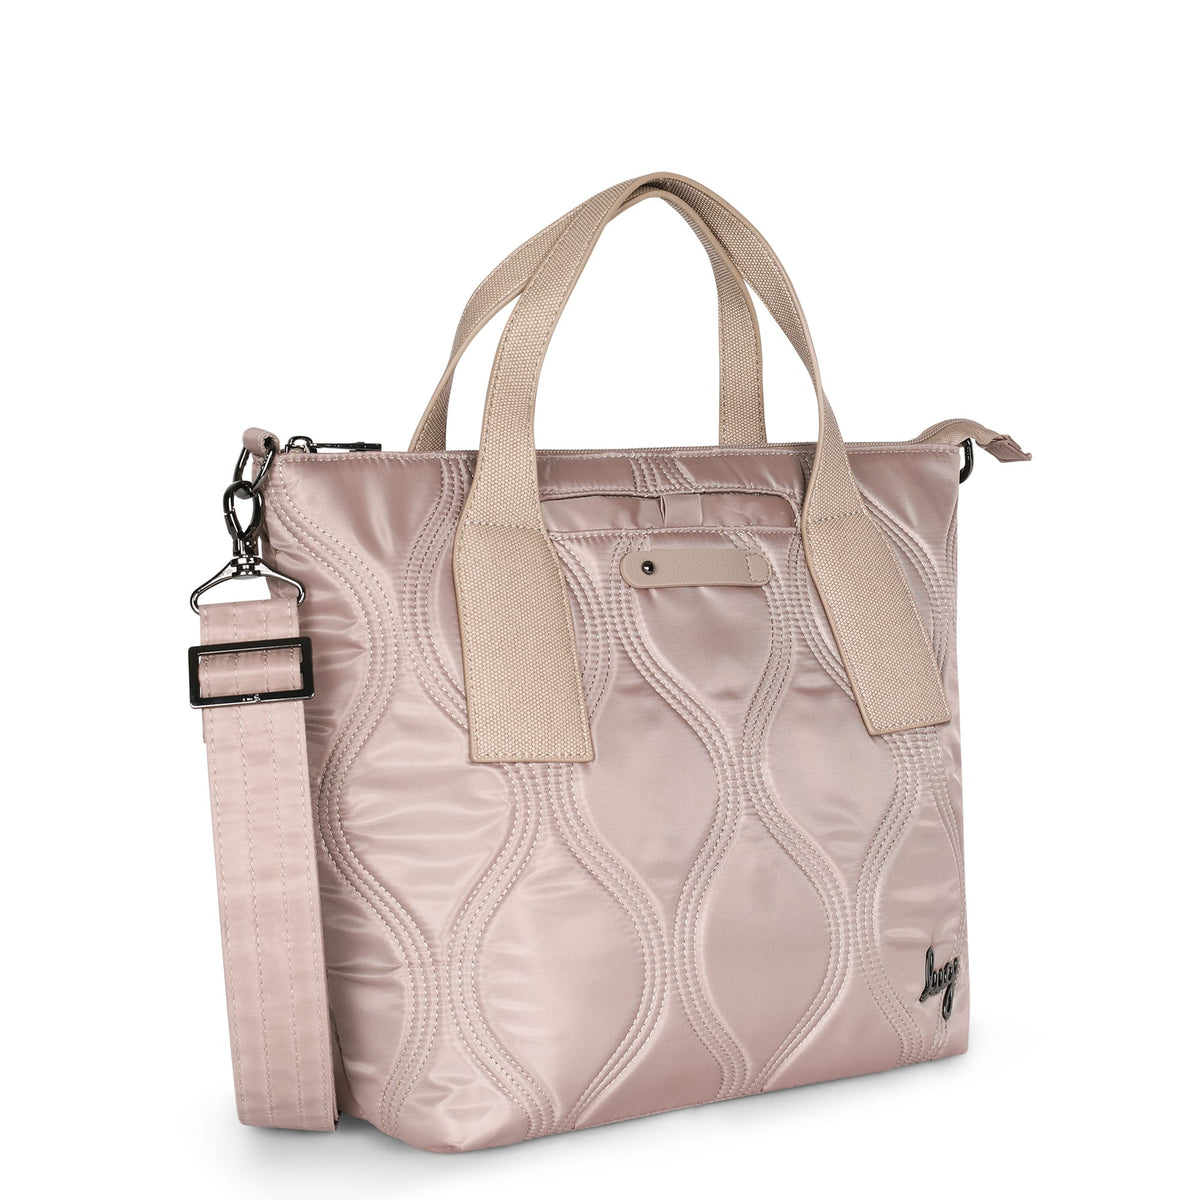 Lug Matte Luxe Tote with Crossbody Strap - Alto ,Silverw/ Icepop